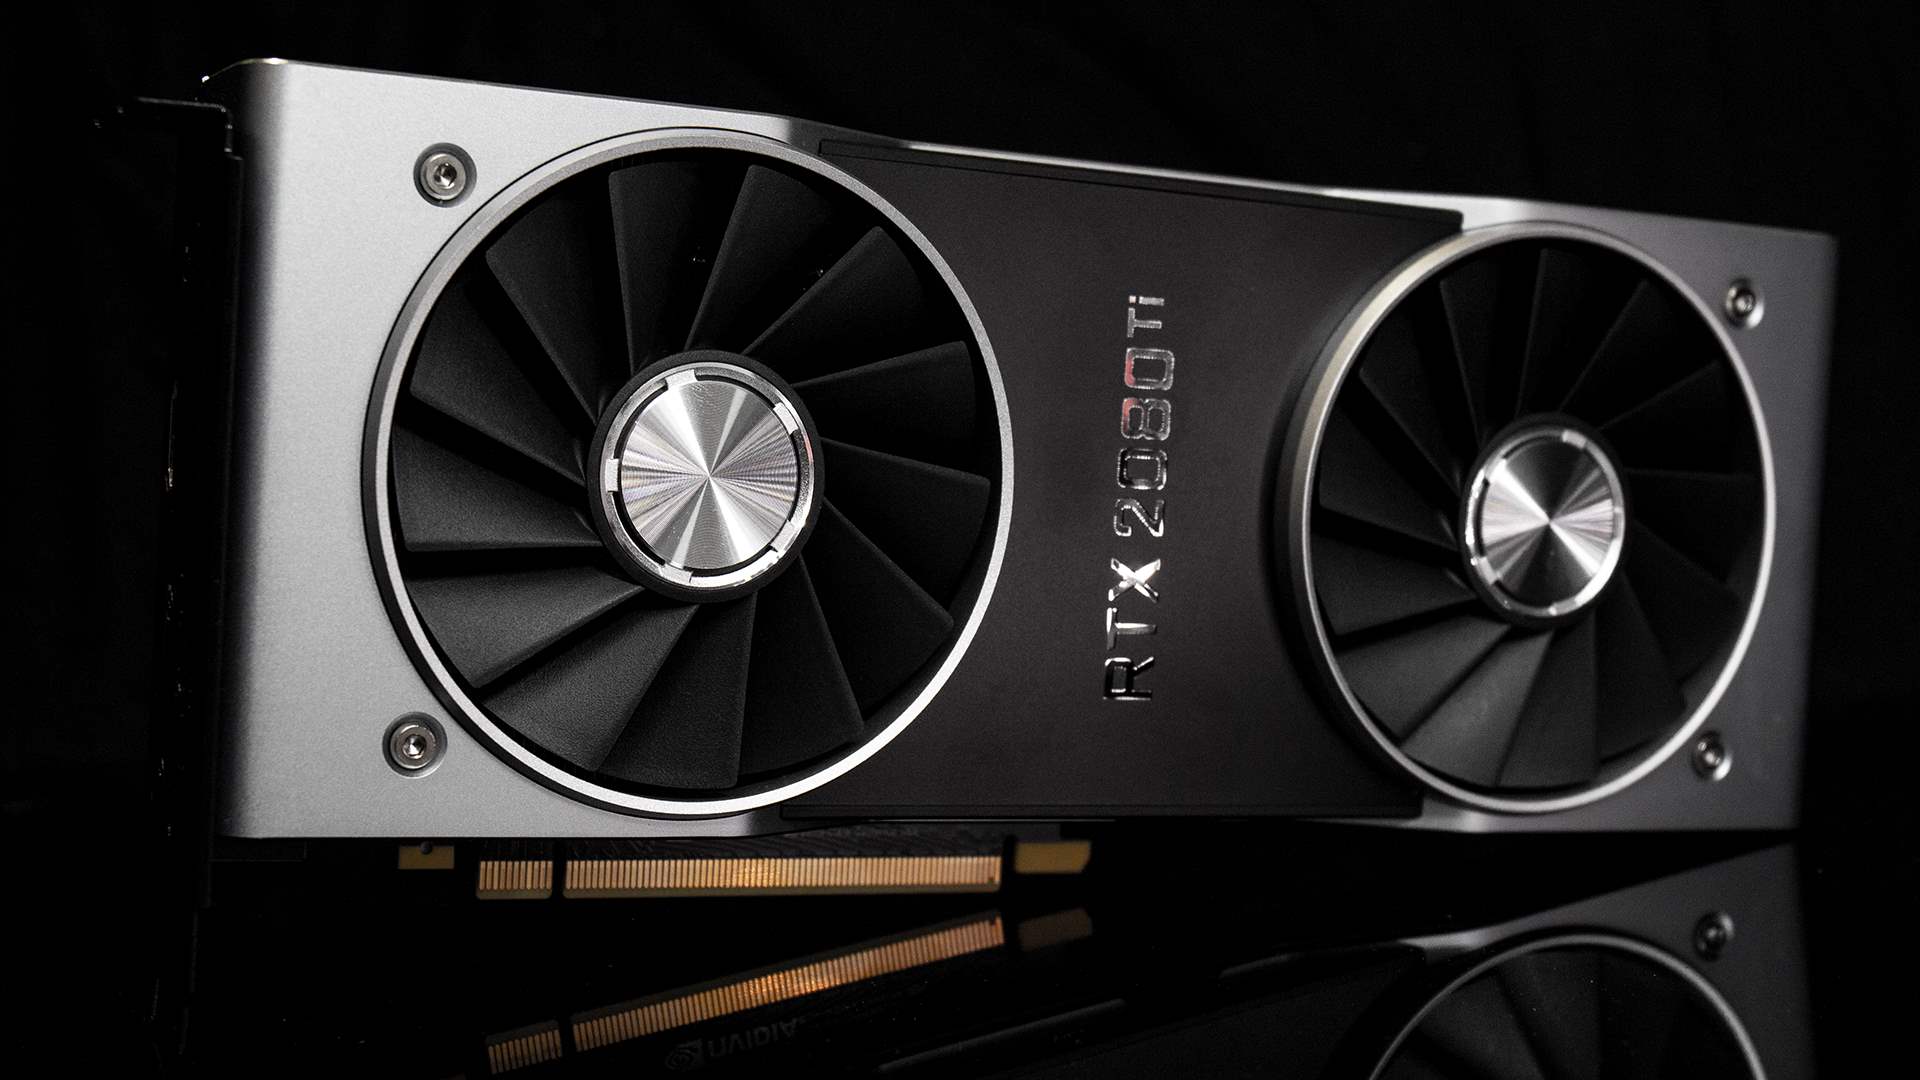 Nvidia GeForce 2080 Ti review: the fastest gaming card around right now | PCGamesN